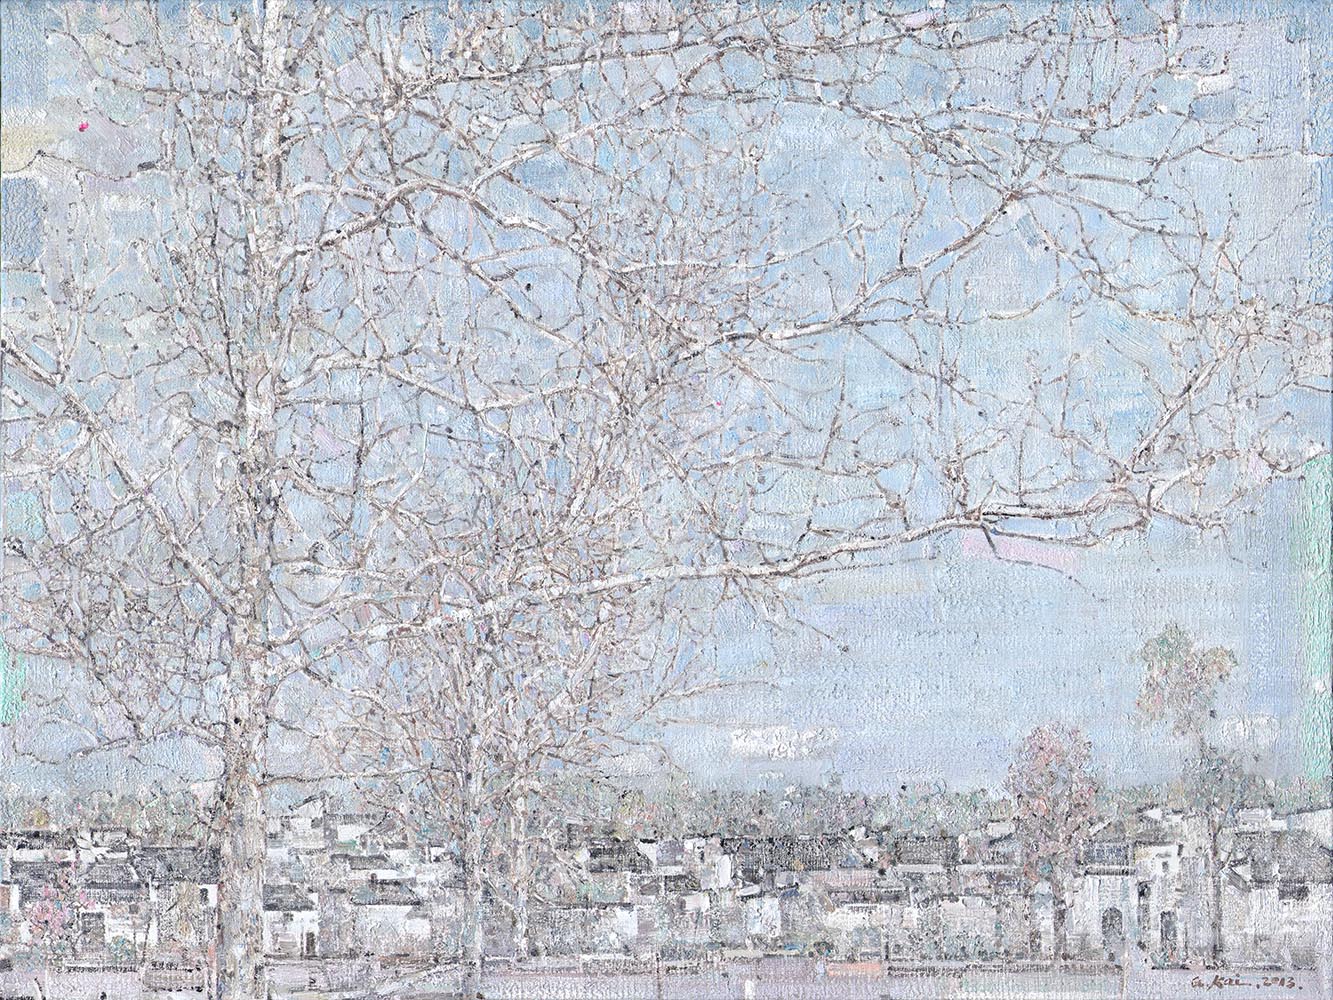 Guo Kai,<i> Blooming Branches, </i>2013